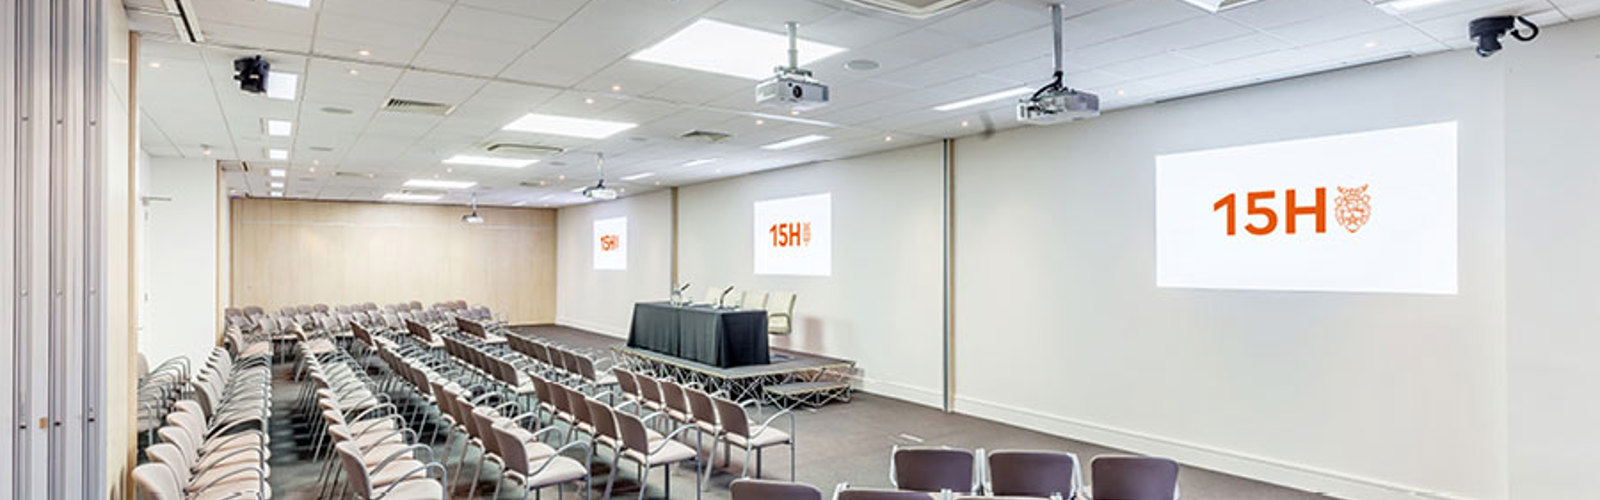 15Hatfields conference and events room